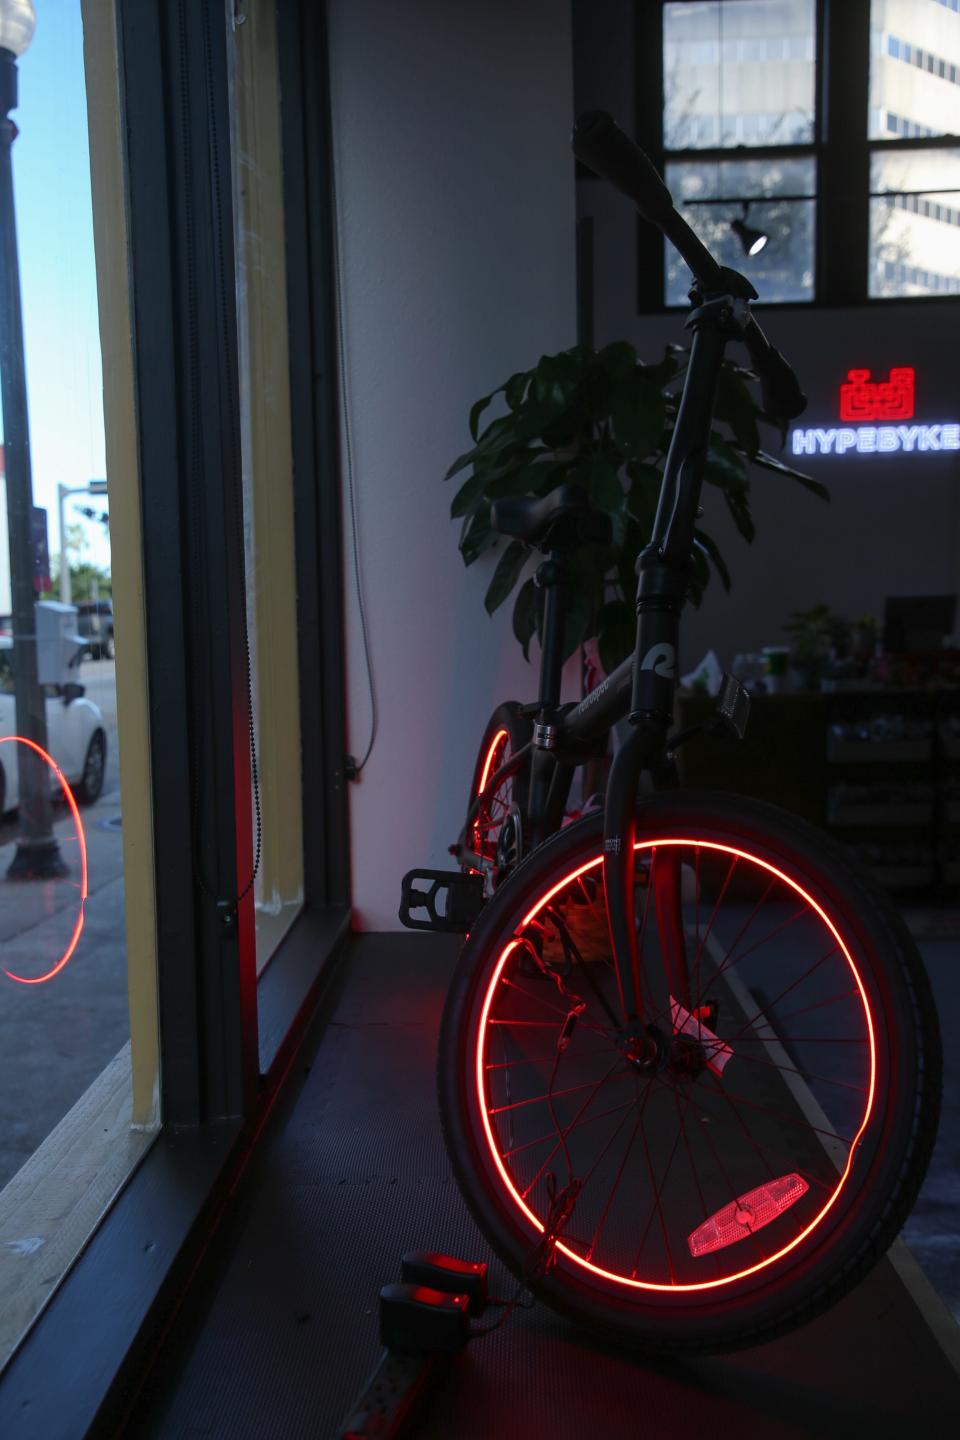 HYPEBYKE, located at 311 Peoples St. in downtown Corpus Christi, sells bicycles and bike gear.